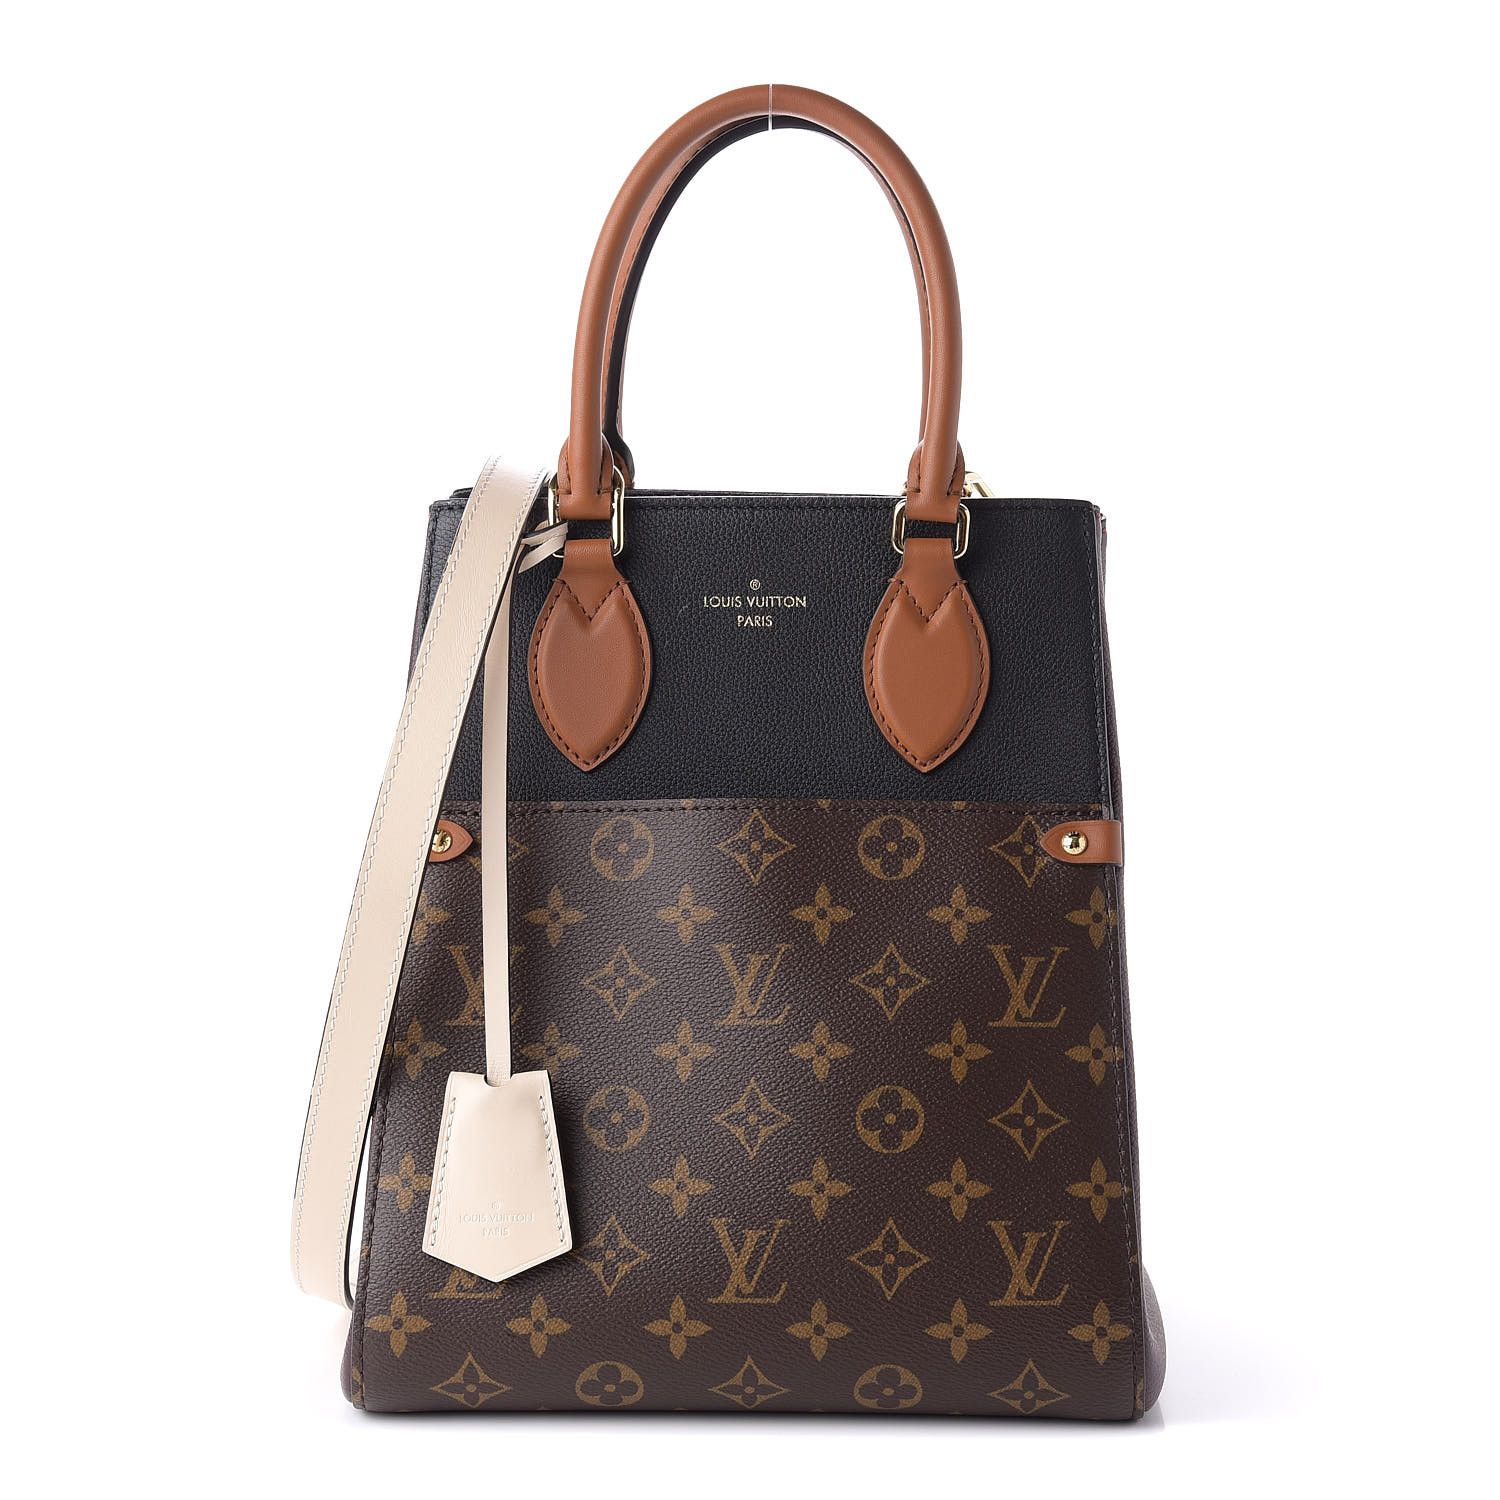 Tote Bag Organizer for Louis Vuitton Propriano Bag with Single Bottle Holder